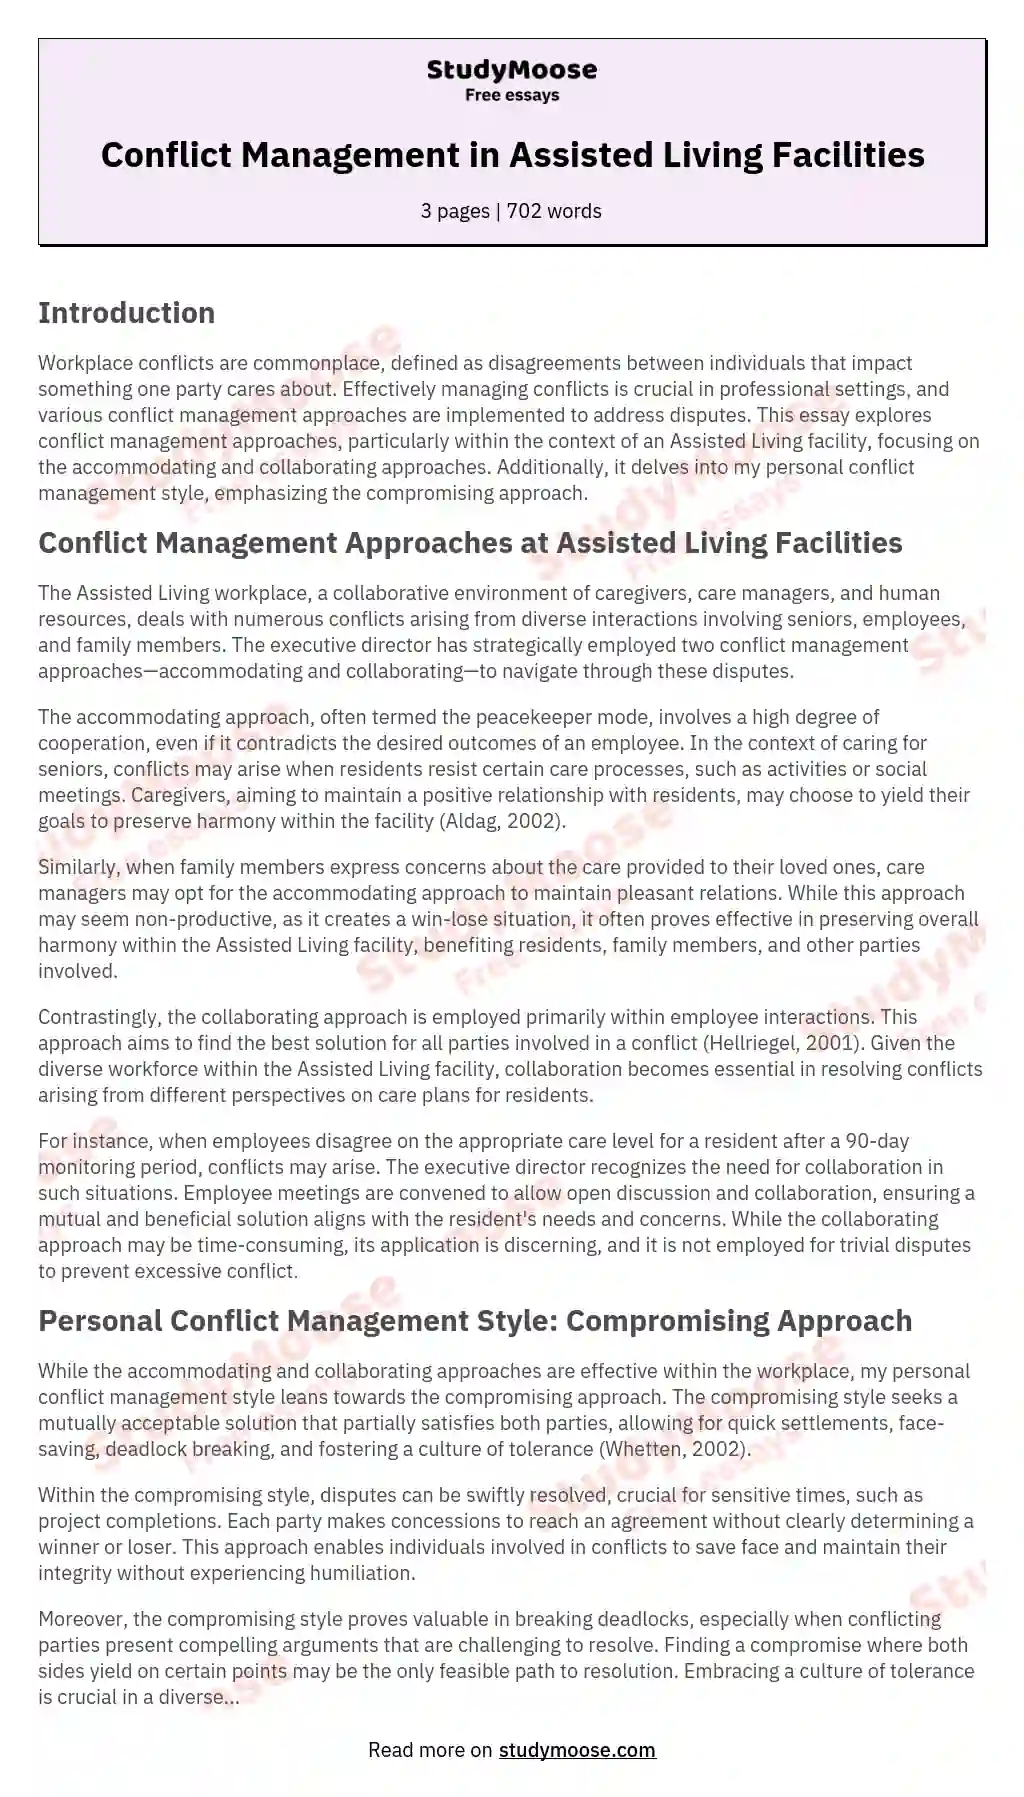 Conflict Management in Assisted Living Facilities essay